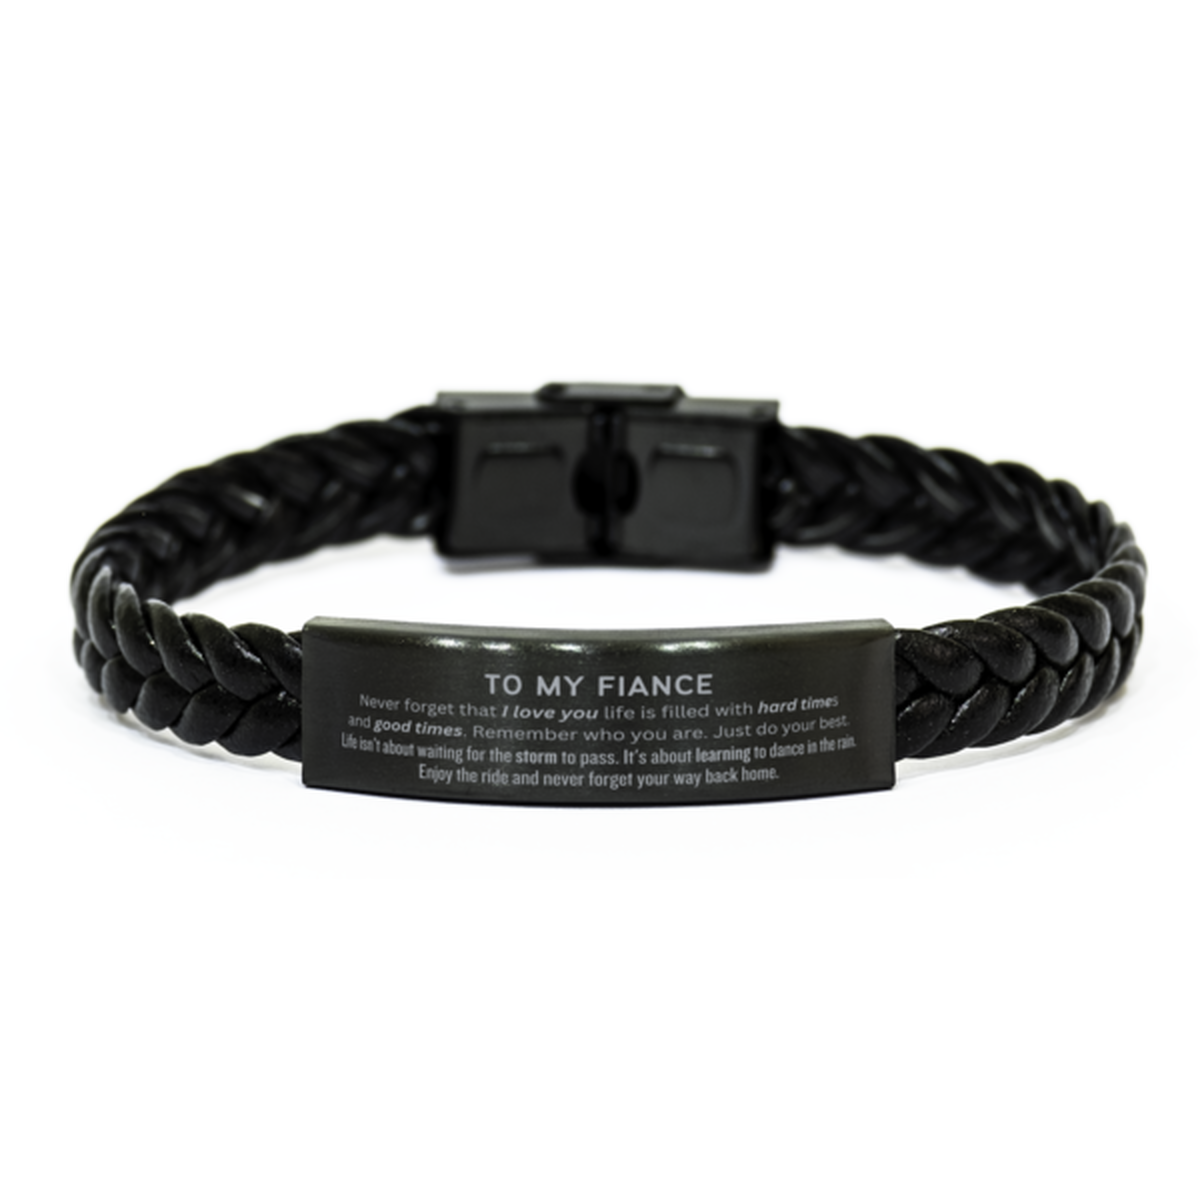 Christmas Fiance Braided Leather Bracelet Gifts, To My Fiance Birthday Thank You Gifts For Fiance, Graduation Unique Gifts For Fiance To My Fiance Never forget that I love you life is filled with hard times and good times. Remember who you are. Just do yo